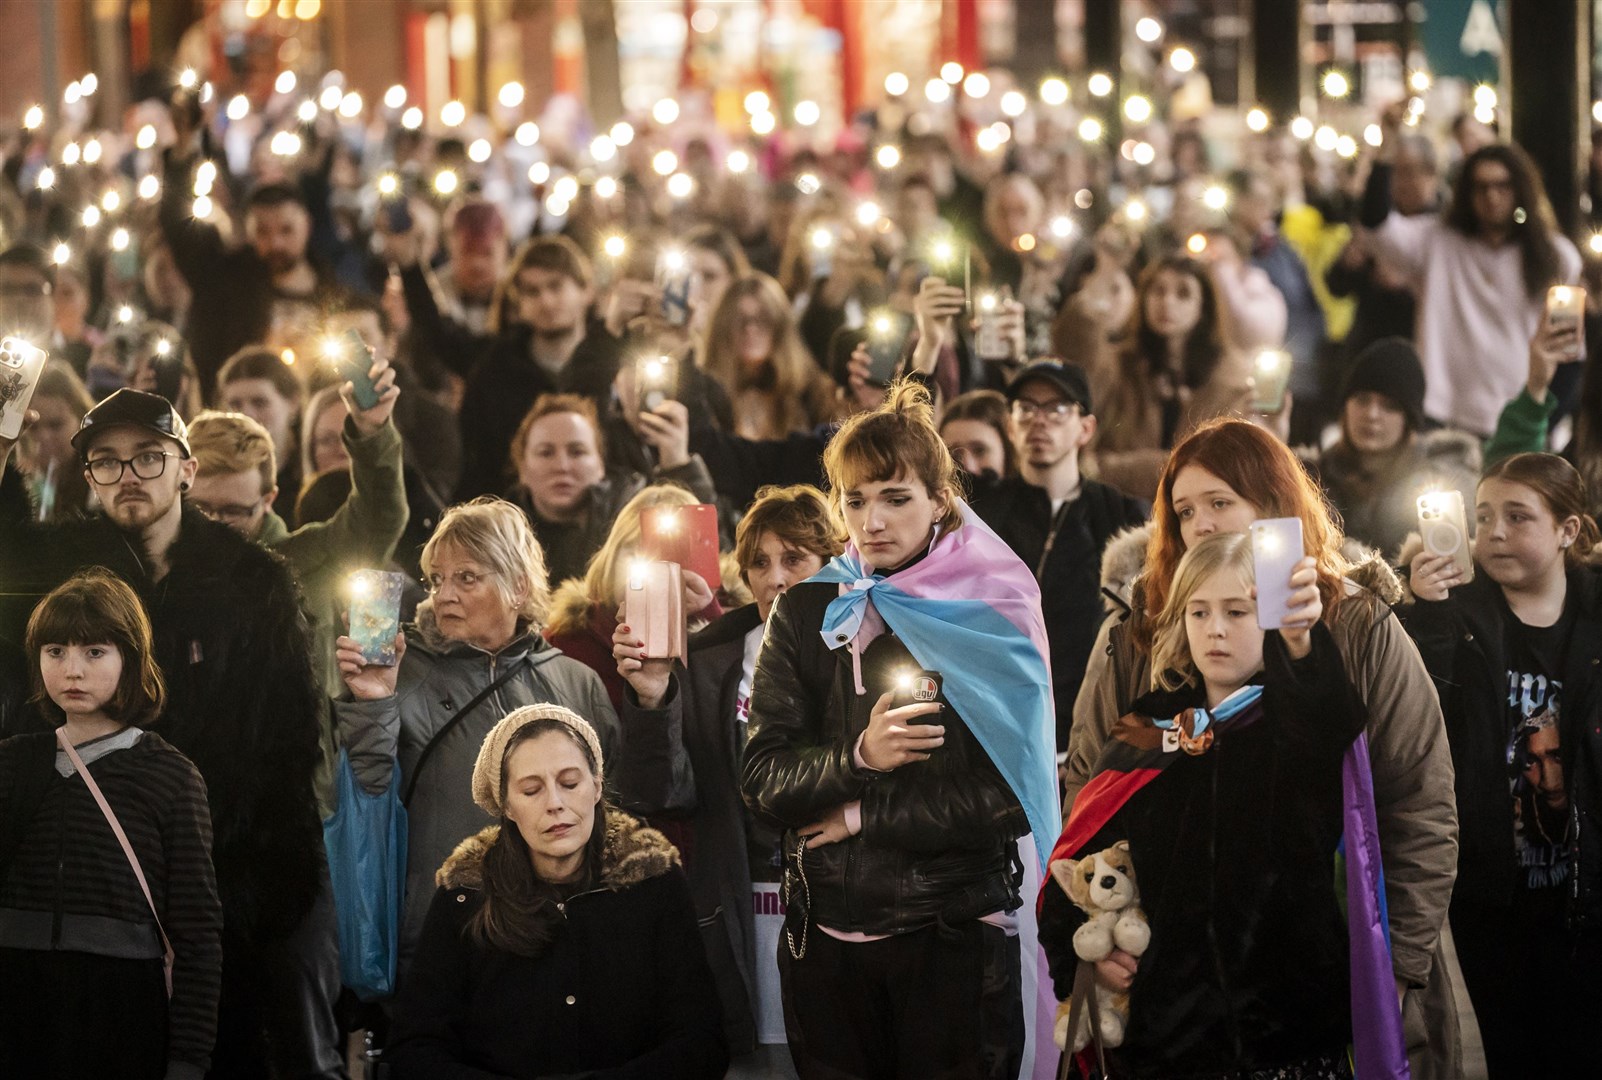 Members of the public hold their phones with the torch function set during a moment of silence as they attend a vigil for Brianna (PA)